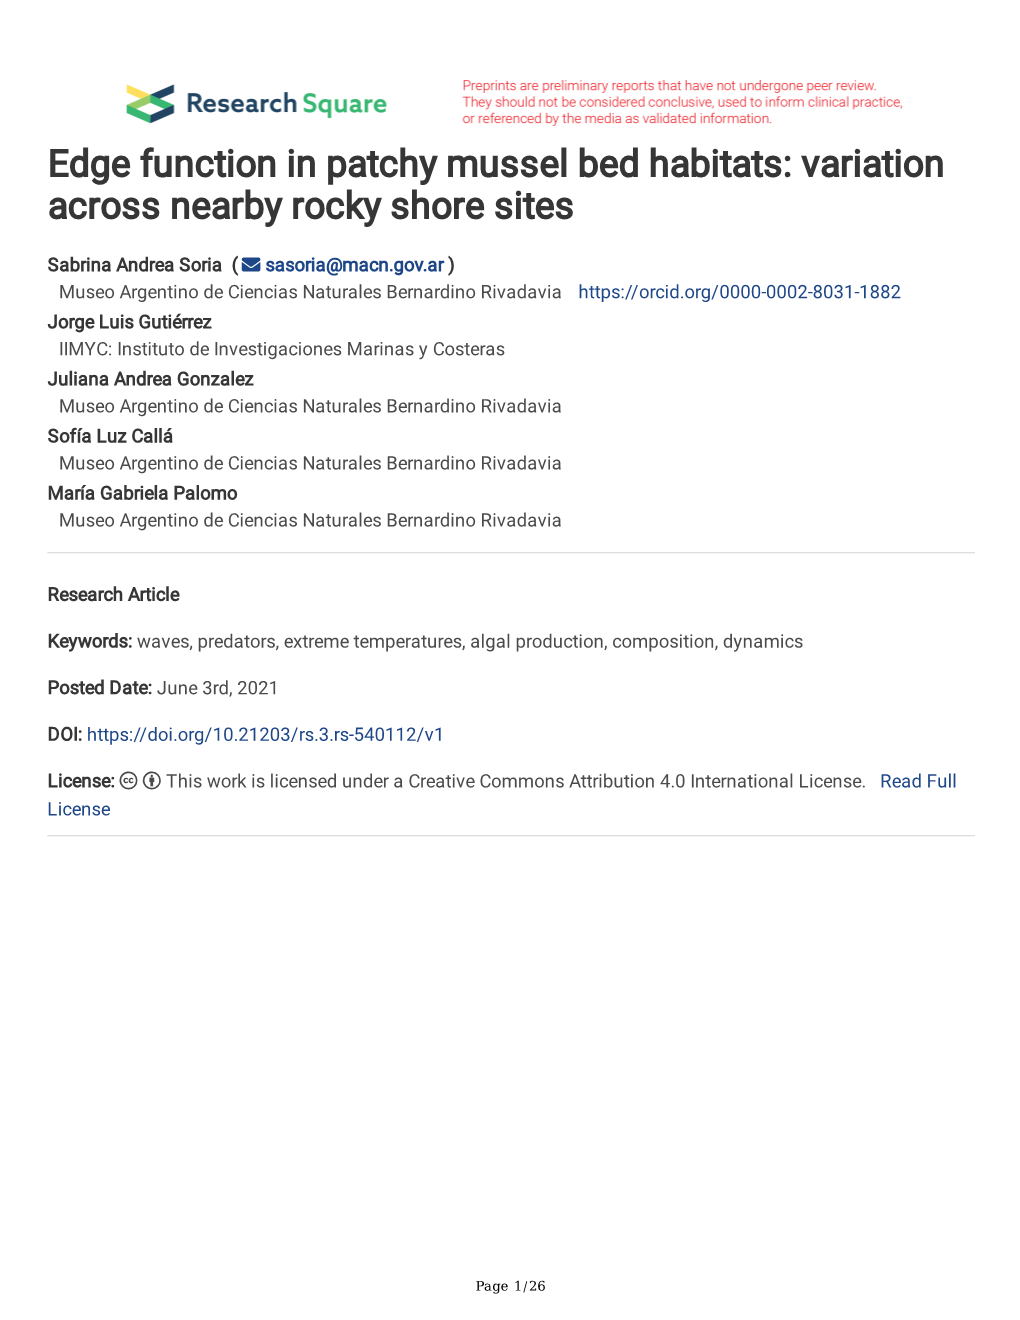 Edge Function in Patchy Mussel Bed Habitats: Variation Across Nearby Rocky Shore Sites